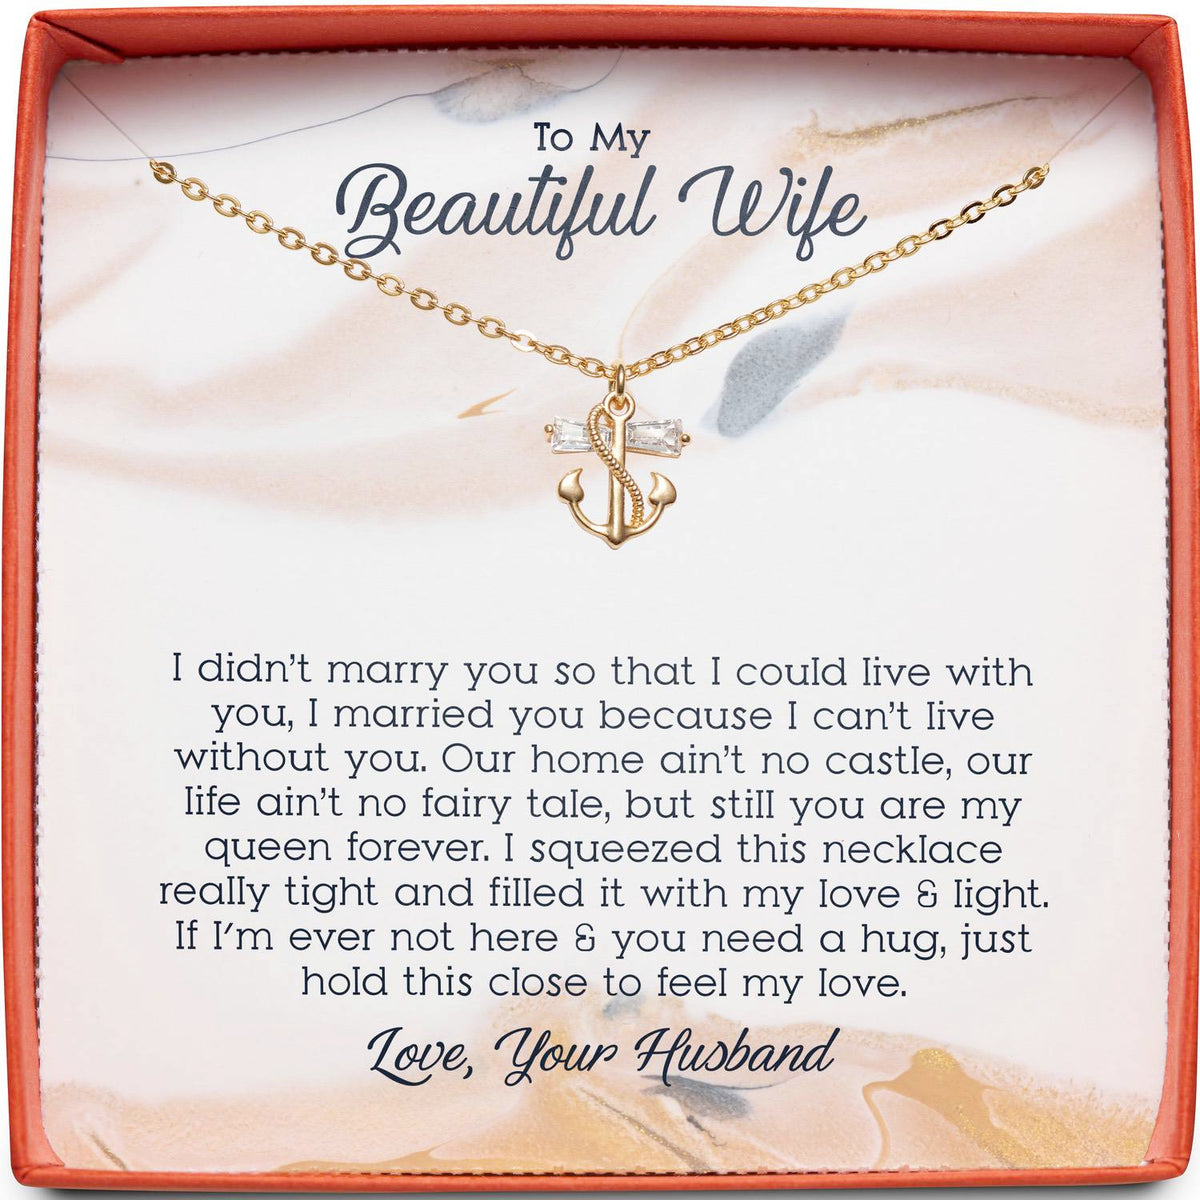 To My Beautiful Wife | I Squeezed This Necklace | Anchor Necklace